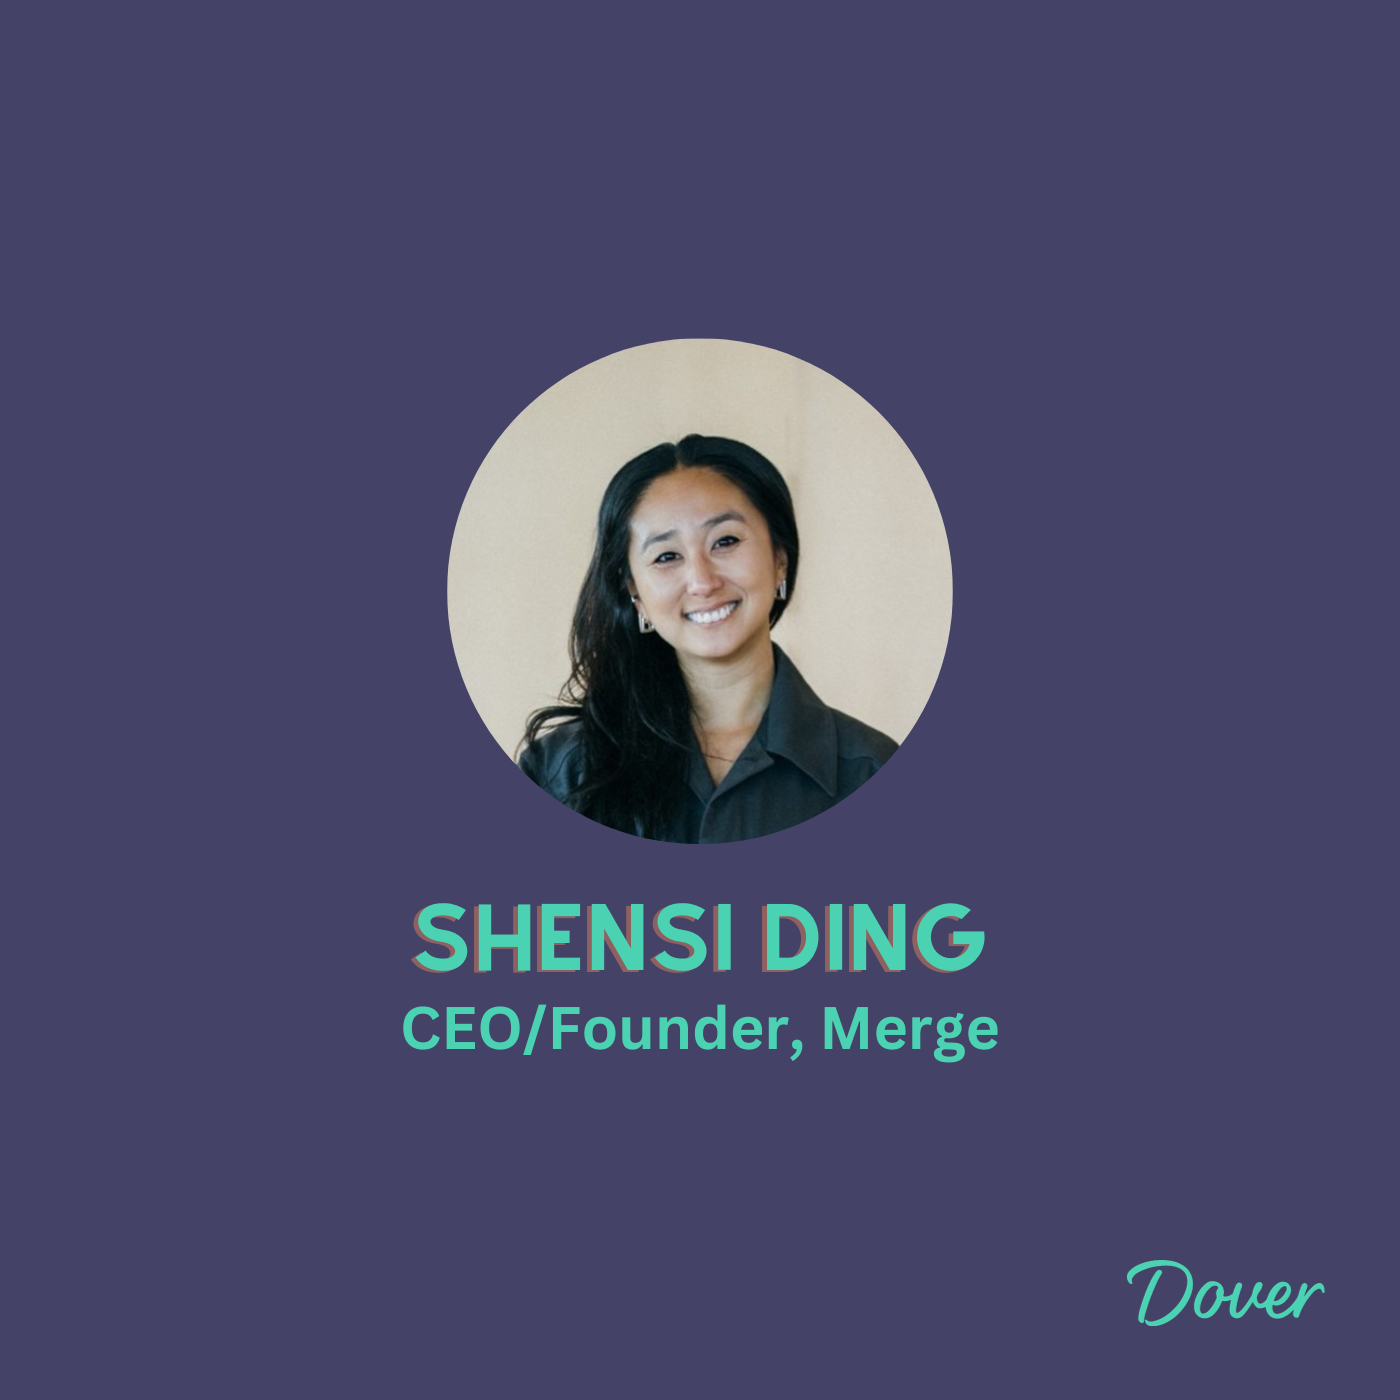 EPISODE #17: Winning with Sourcing: Shensi Ding, CEO and Co-founder of Merge, Shares Their Secret Sauce to Hiring A Skills and Culture Fit Every Time